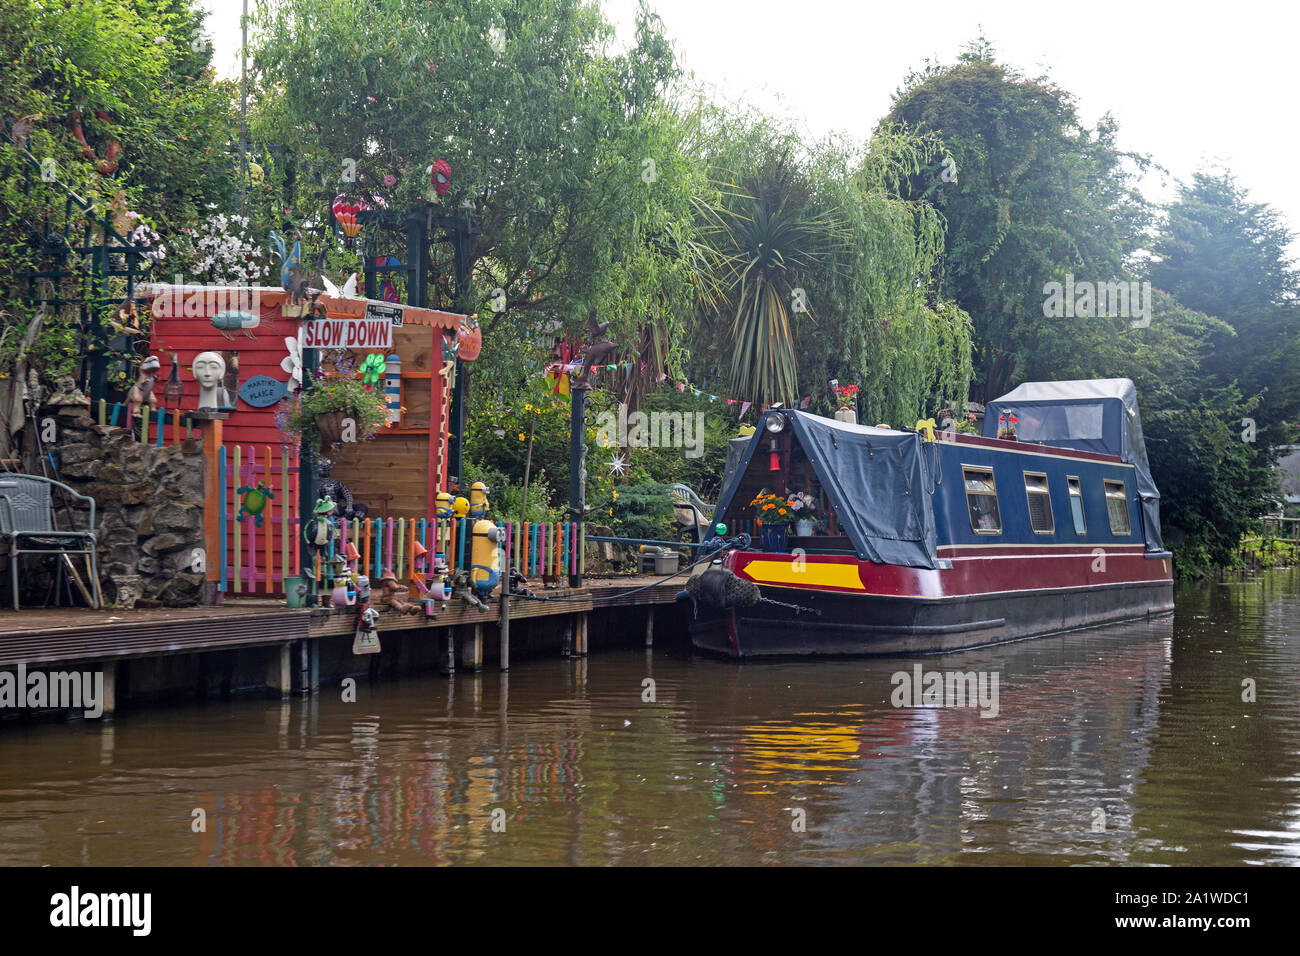 A Narrow Boat, or Barge, moored up alongside a colourful, fun, mooring on The Shropshire Union Canal in England. Stock Photo